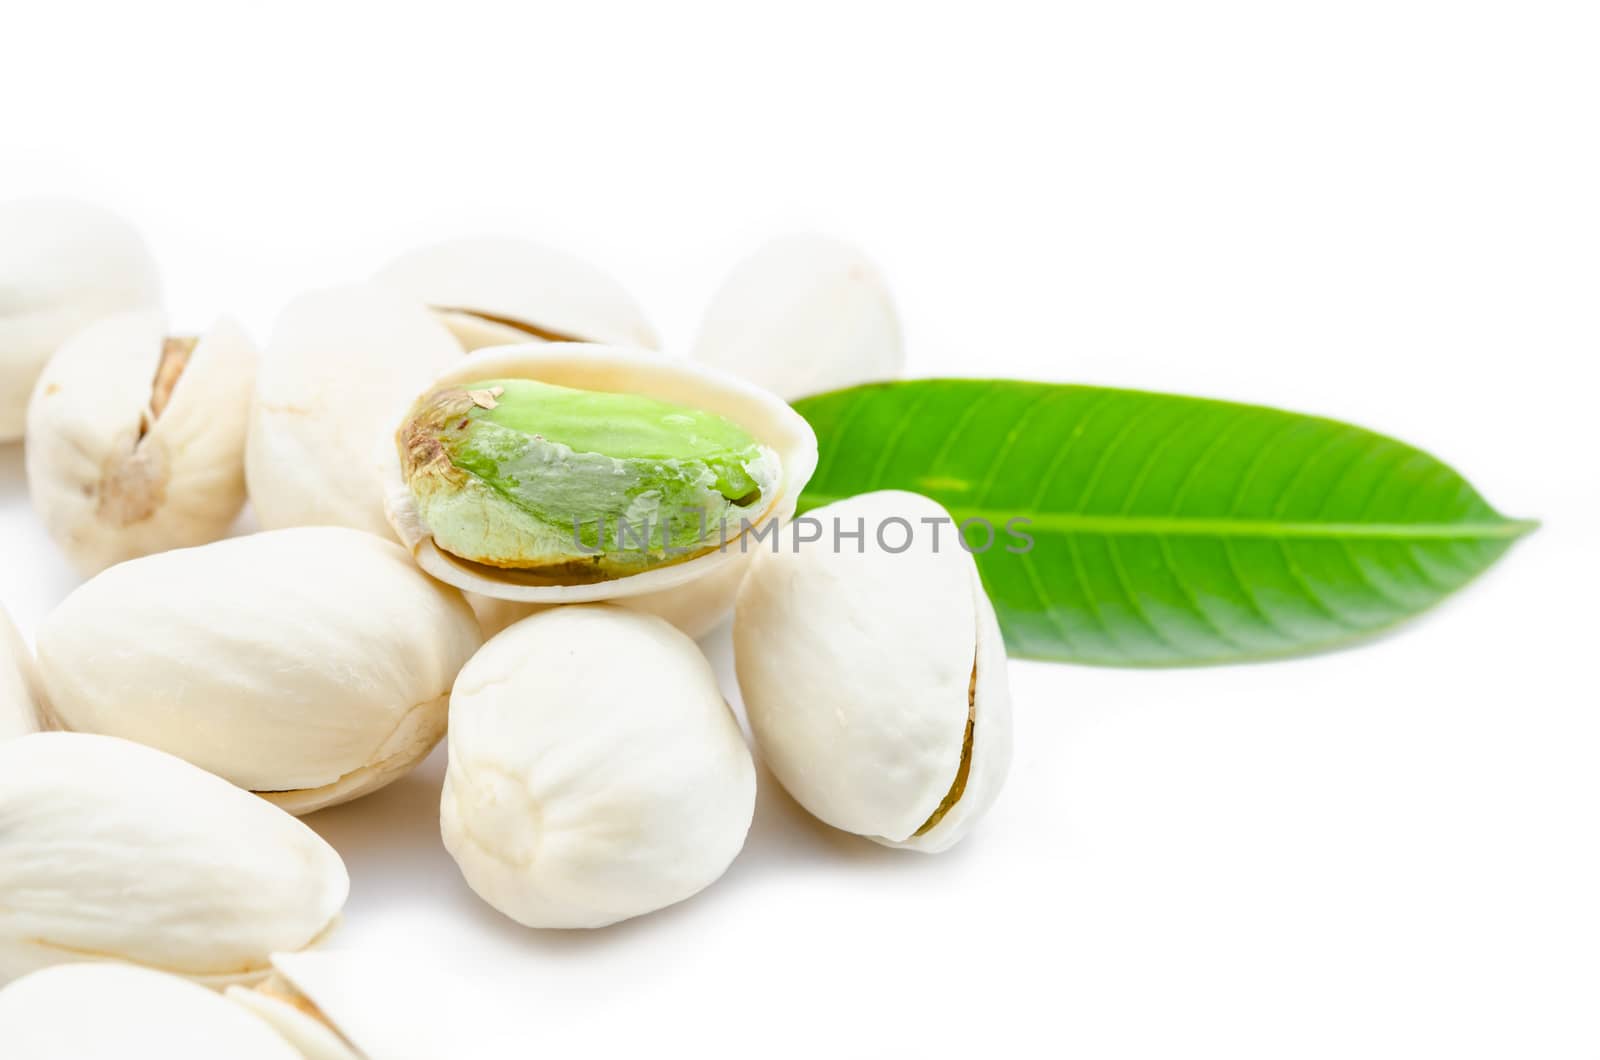 Pistachio nuts with green leaf on white background.